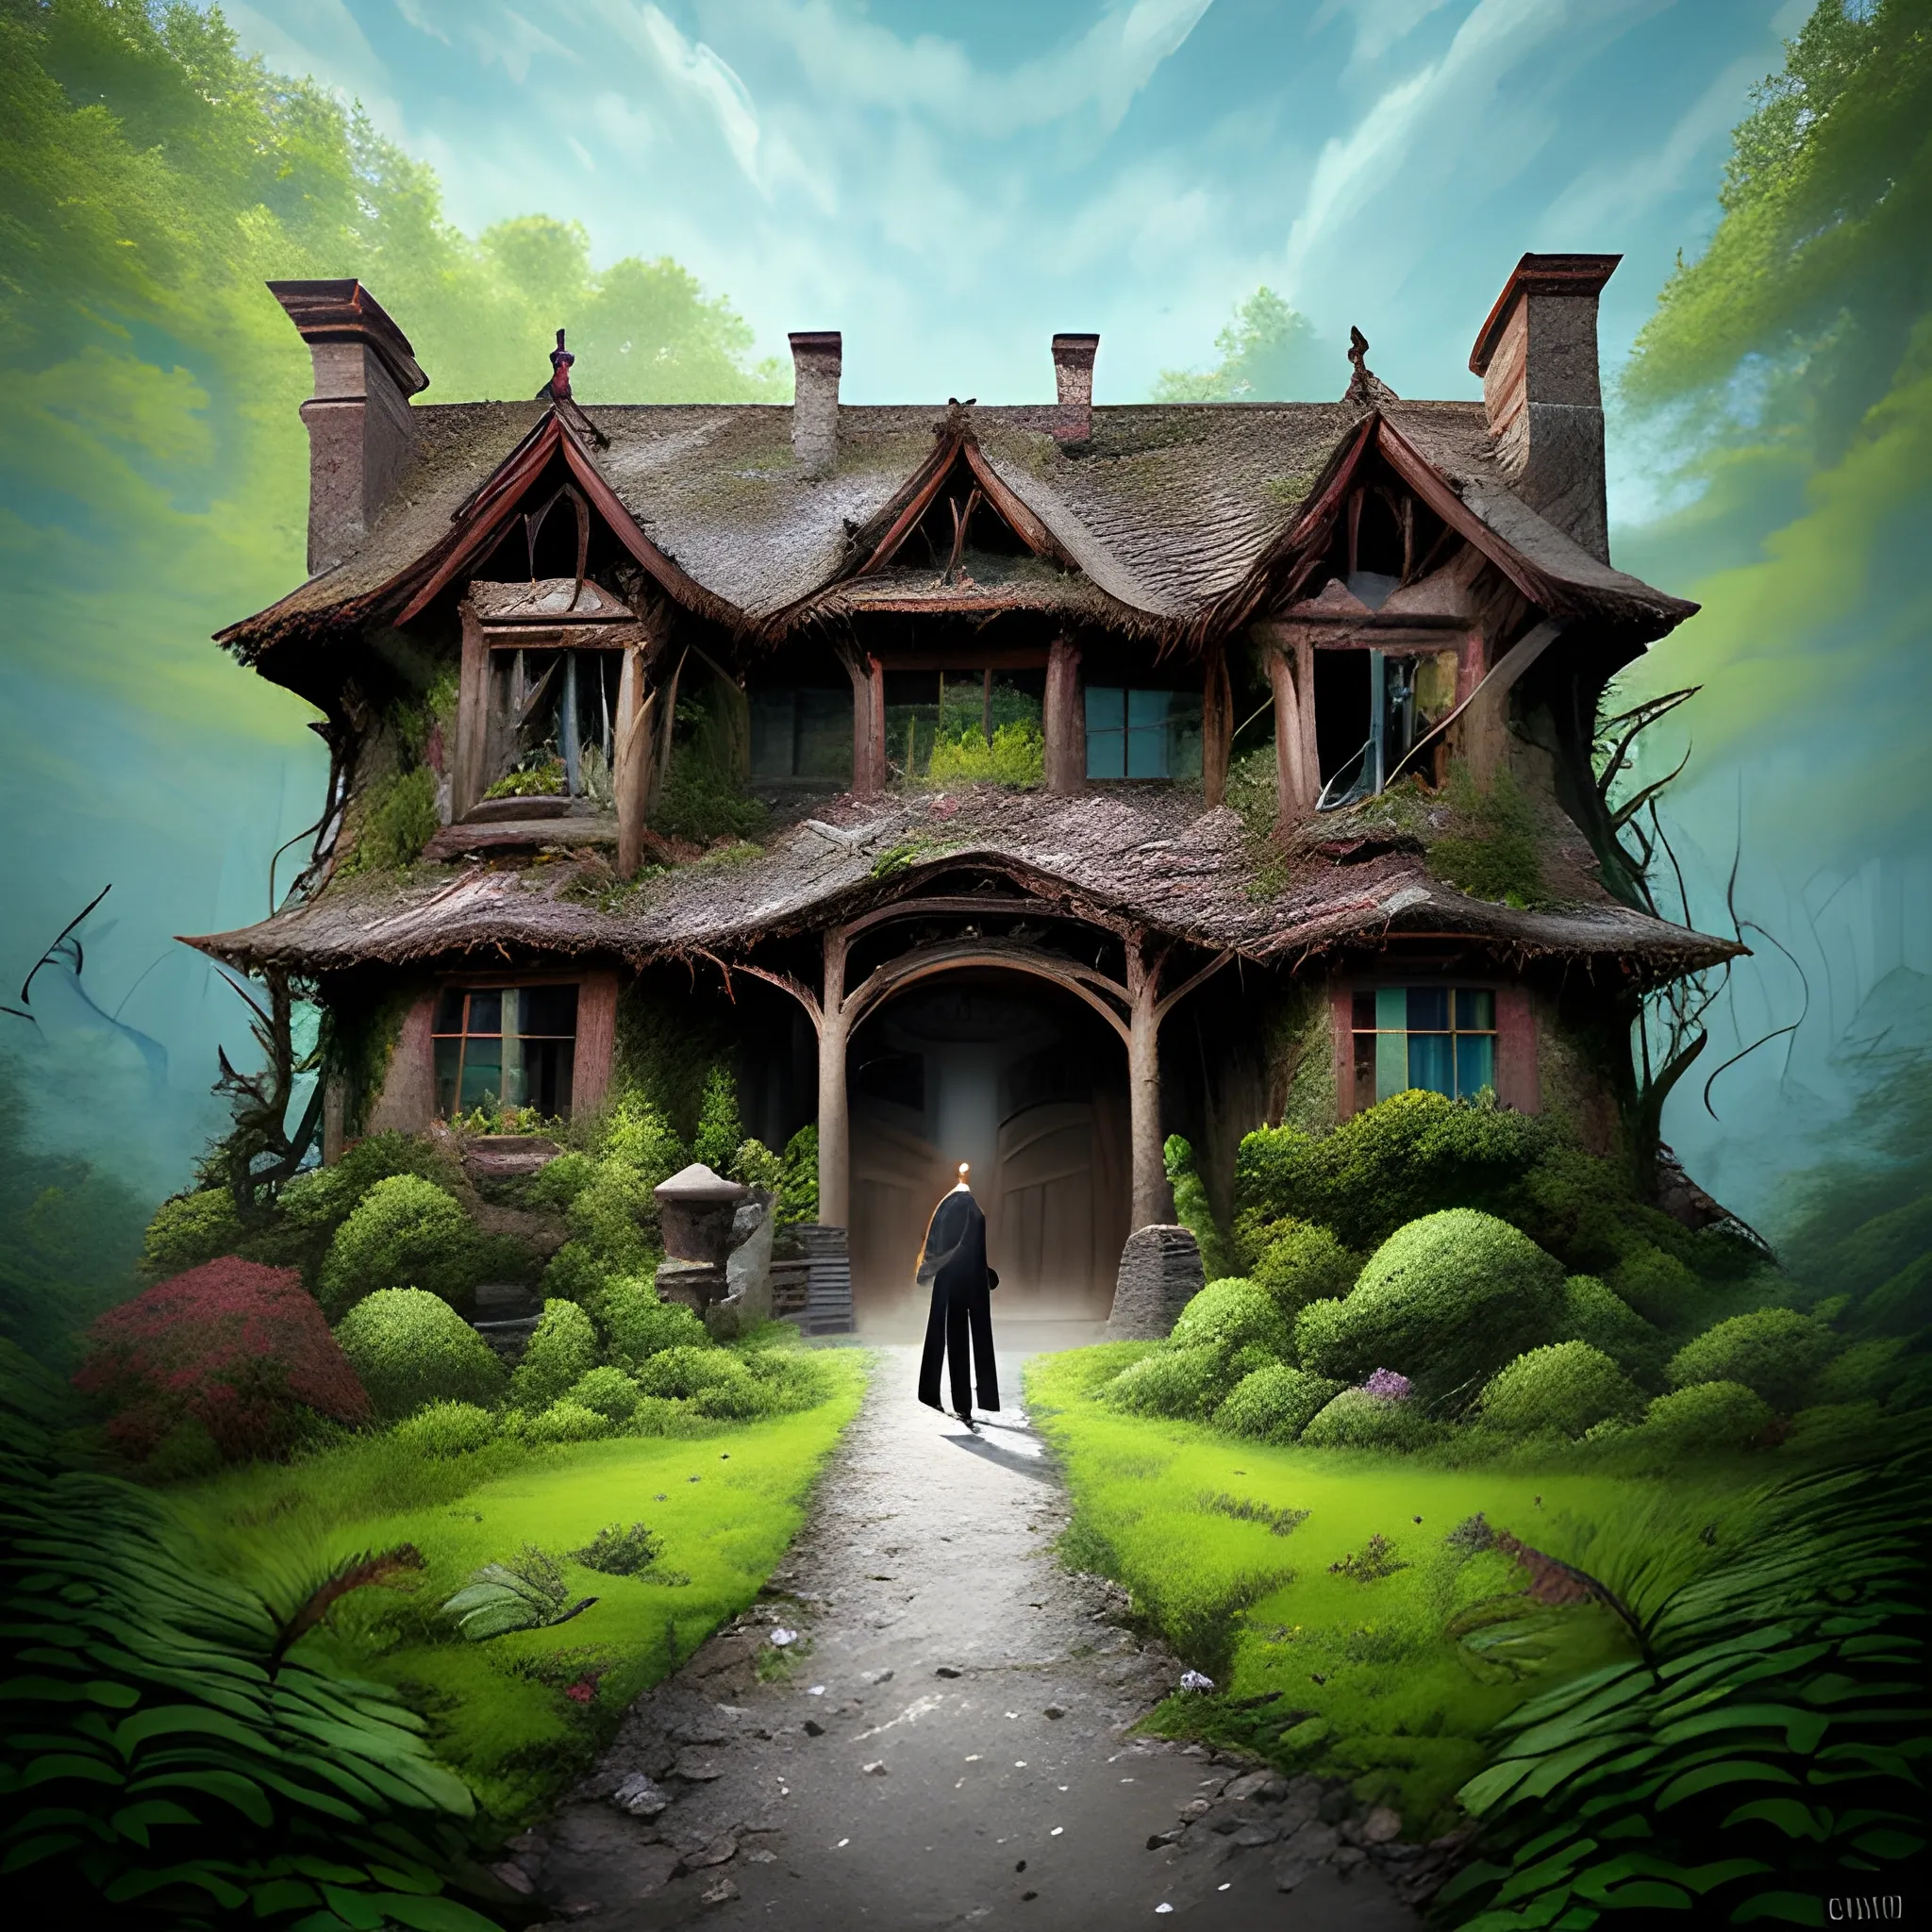 Description: Picture four children (two boys and two girls) standing at the edge of a dense forest. They should look intrigued and maybe a bit cautious as they observe an old, eerie house that seems to have appeared among the trees. The house should look dilapidated, with broken windows and ivy creeping up its walls.
Image Elements: Dense forest, old house, four children (different ages and appearances), curious and cautious expressions. , Realistic , vibrant, Cartoon